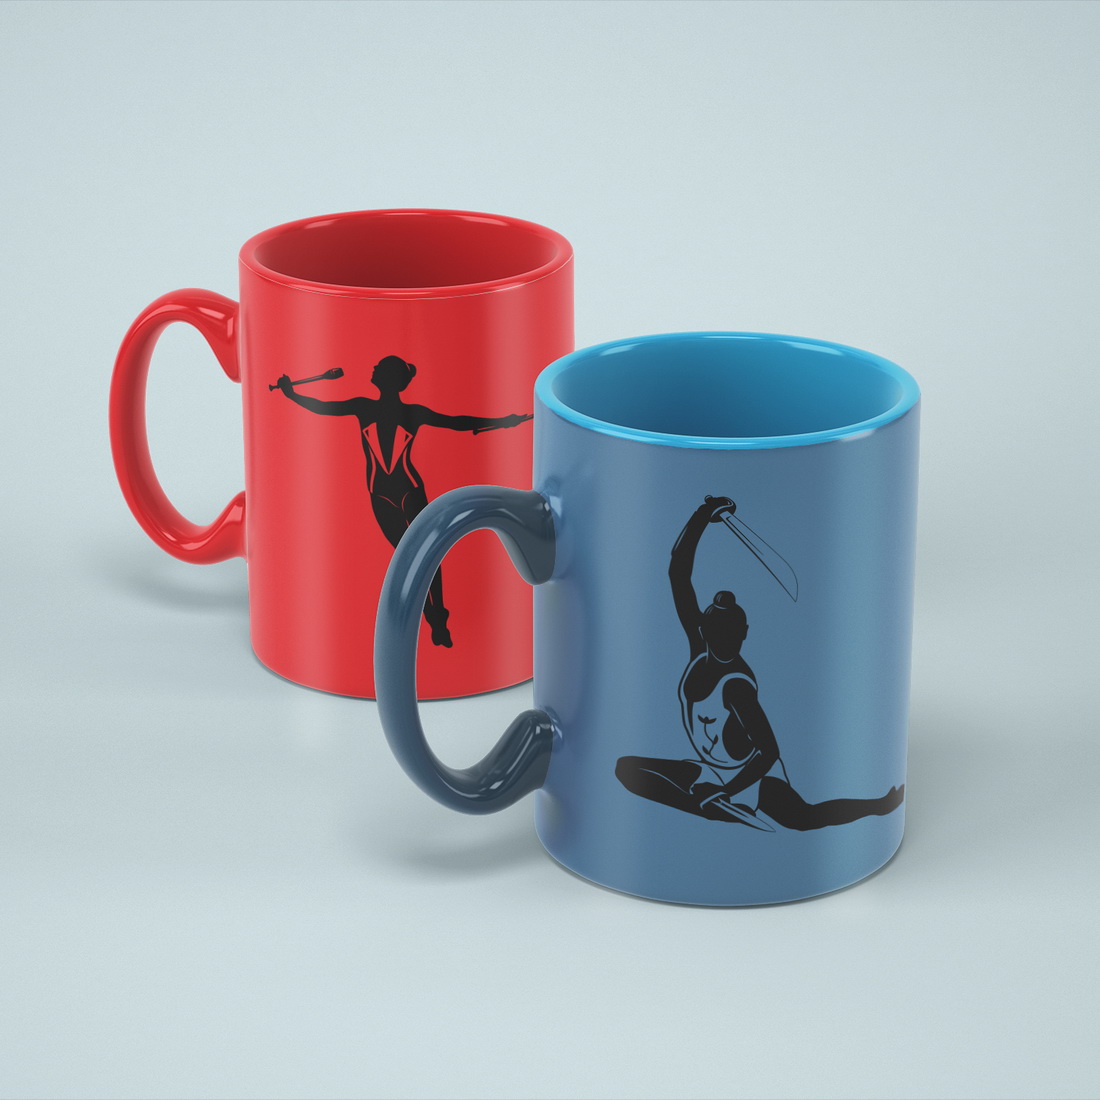 Two mugs with gymnasts.